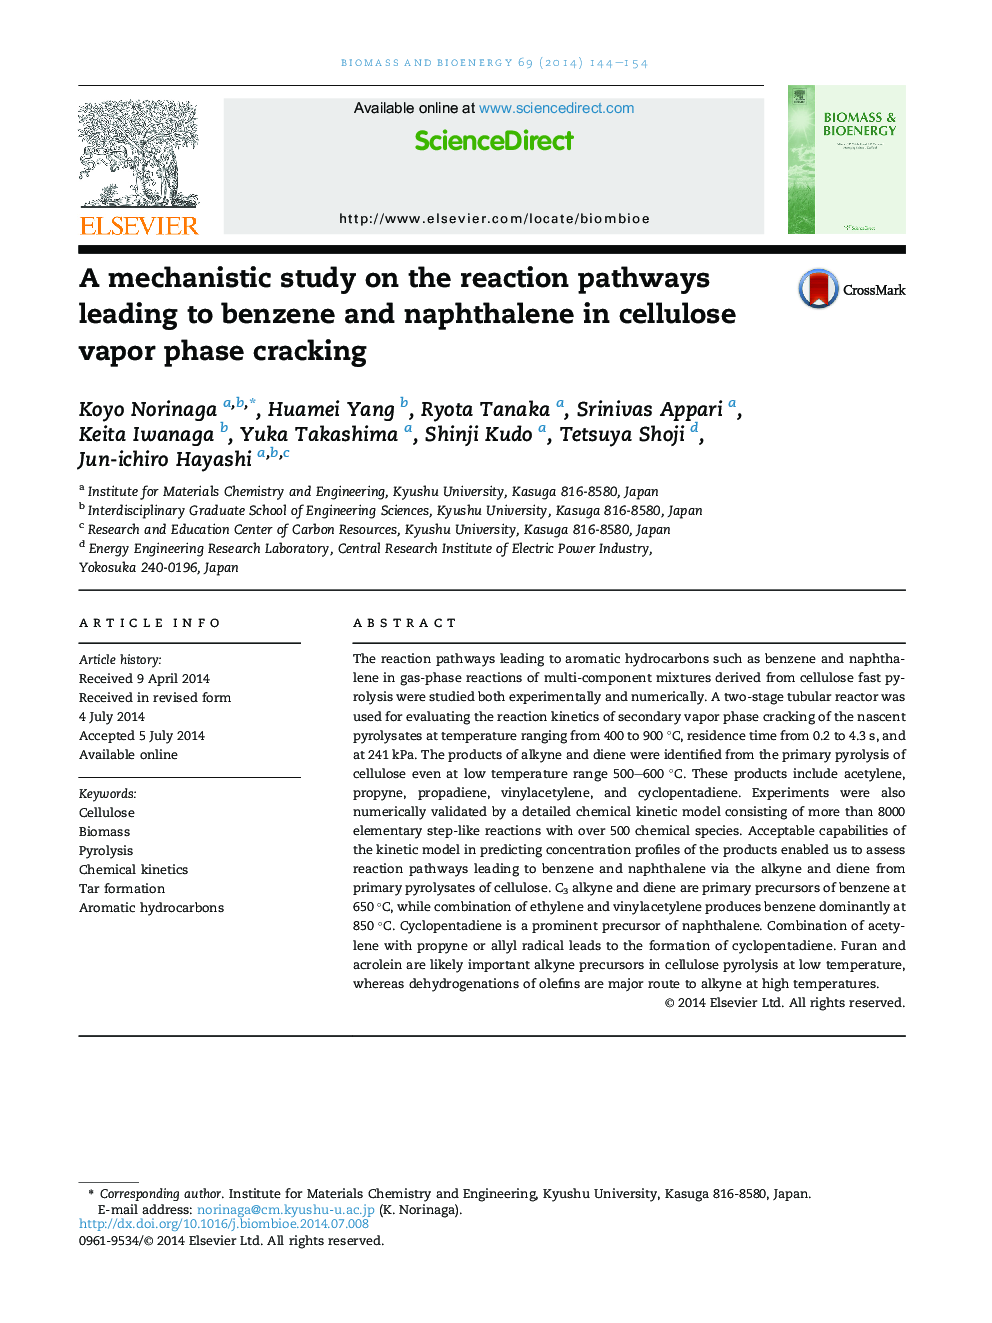 A mechanistic study on the reaction pathways leading to benzene and naphthalene in cellulose vapor phase cracking